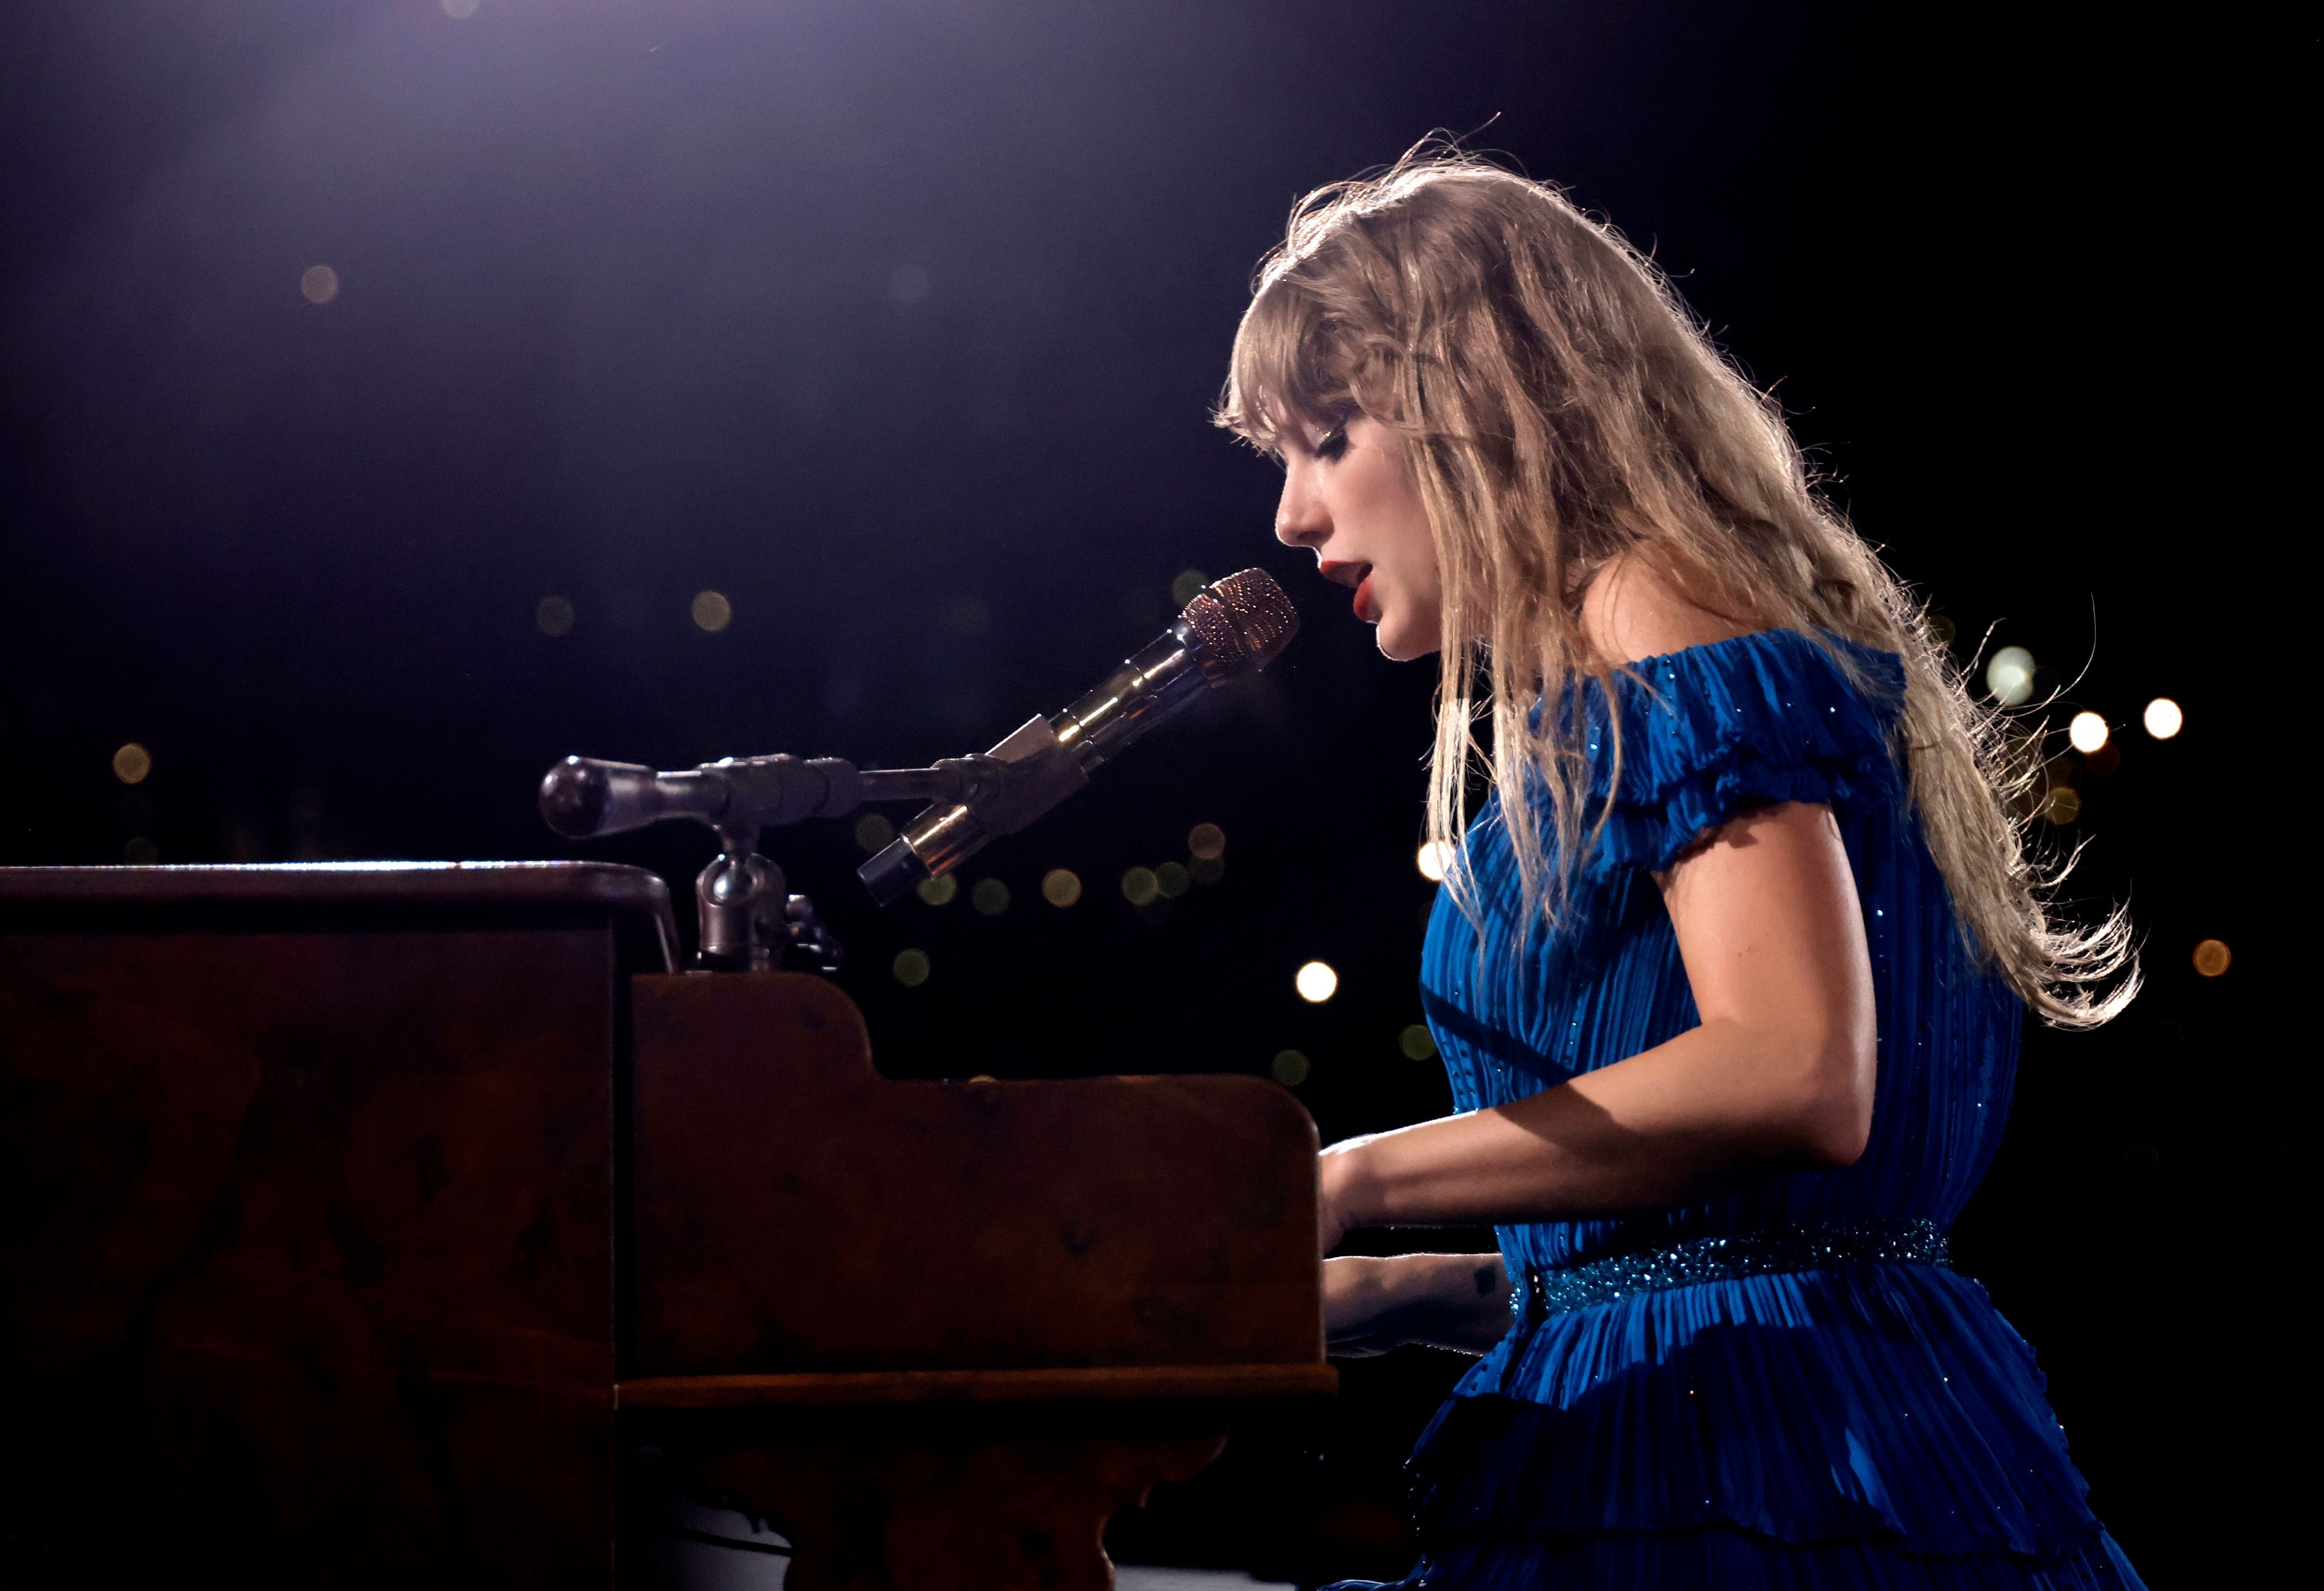 Close-up of Taylor performing onstage at a piano